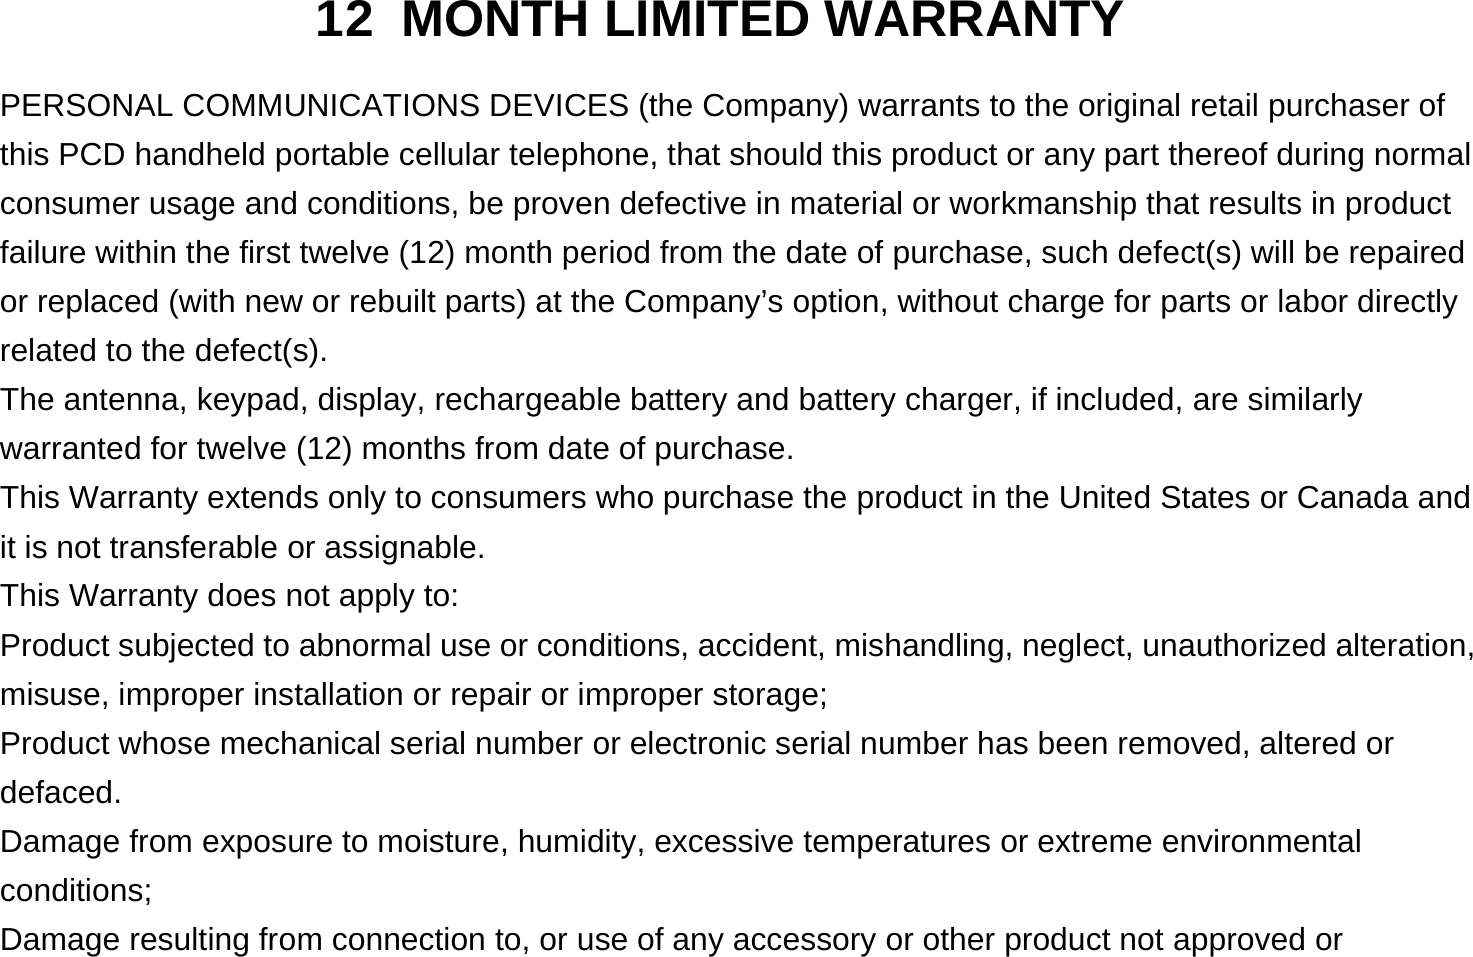 12 MONTH LIMITED WARRANTY PERSONAL COMMUNICATIONS DEVICES (the Company) warrants to the original retail purchaser of this PCD handheld portable cellular telephone, that should this product or any part thereof during normal consumer usage and conditions, be proven defective in material or workmanship that results in product failure within the first twelve (12) month period from the date of purchase, such defect(s) will be repaired or replaced (with new or rebuilt parts) at the Company’s option, without charge for parts or labor directly related to the defect(s). The antenna, keypad, display, rechargeable battery and battery charger, if included, are similarly warranted for twelve (12) months from date of purchase.     This Warranty extends only to consumers who purchase the product in the United States or Canada and it is not transferable or assignable. This Warranty does not apply to: Product subjected to abnormal use or conditions, accident, mishandling, neglect, unauthorized alteration, misuse, improper installation or repair or improper storage; Product whose mechanical serial number or electronic serial number has been removed, altered or defaced. Damage from exposure to moisture, humidity, excessive temperatures or extreme environmental conditions; Damage resulting from connection to, or use of any accessory or other product not approved or 